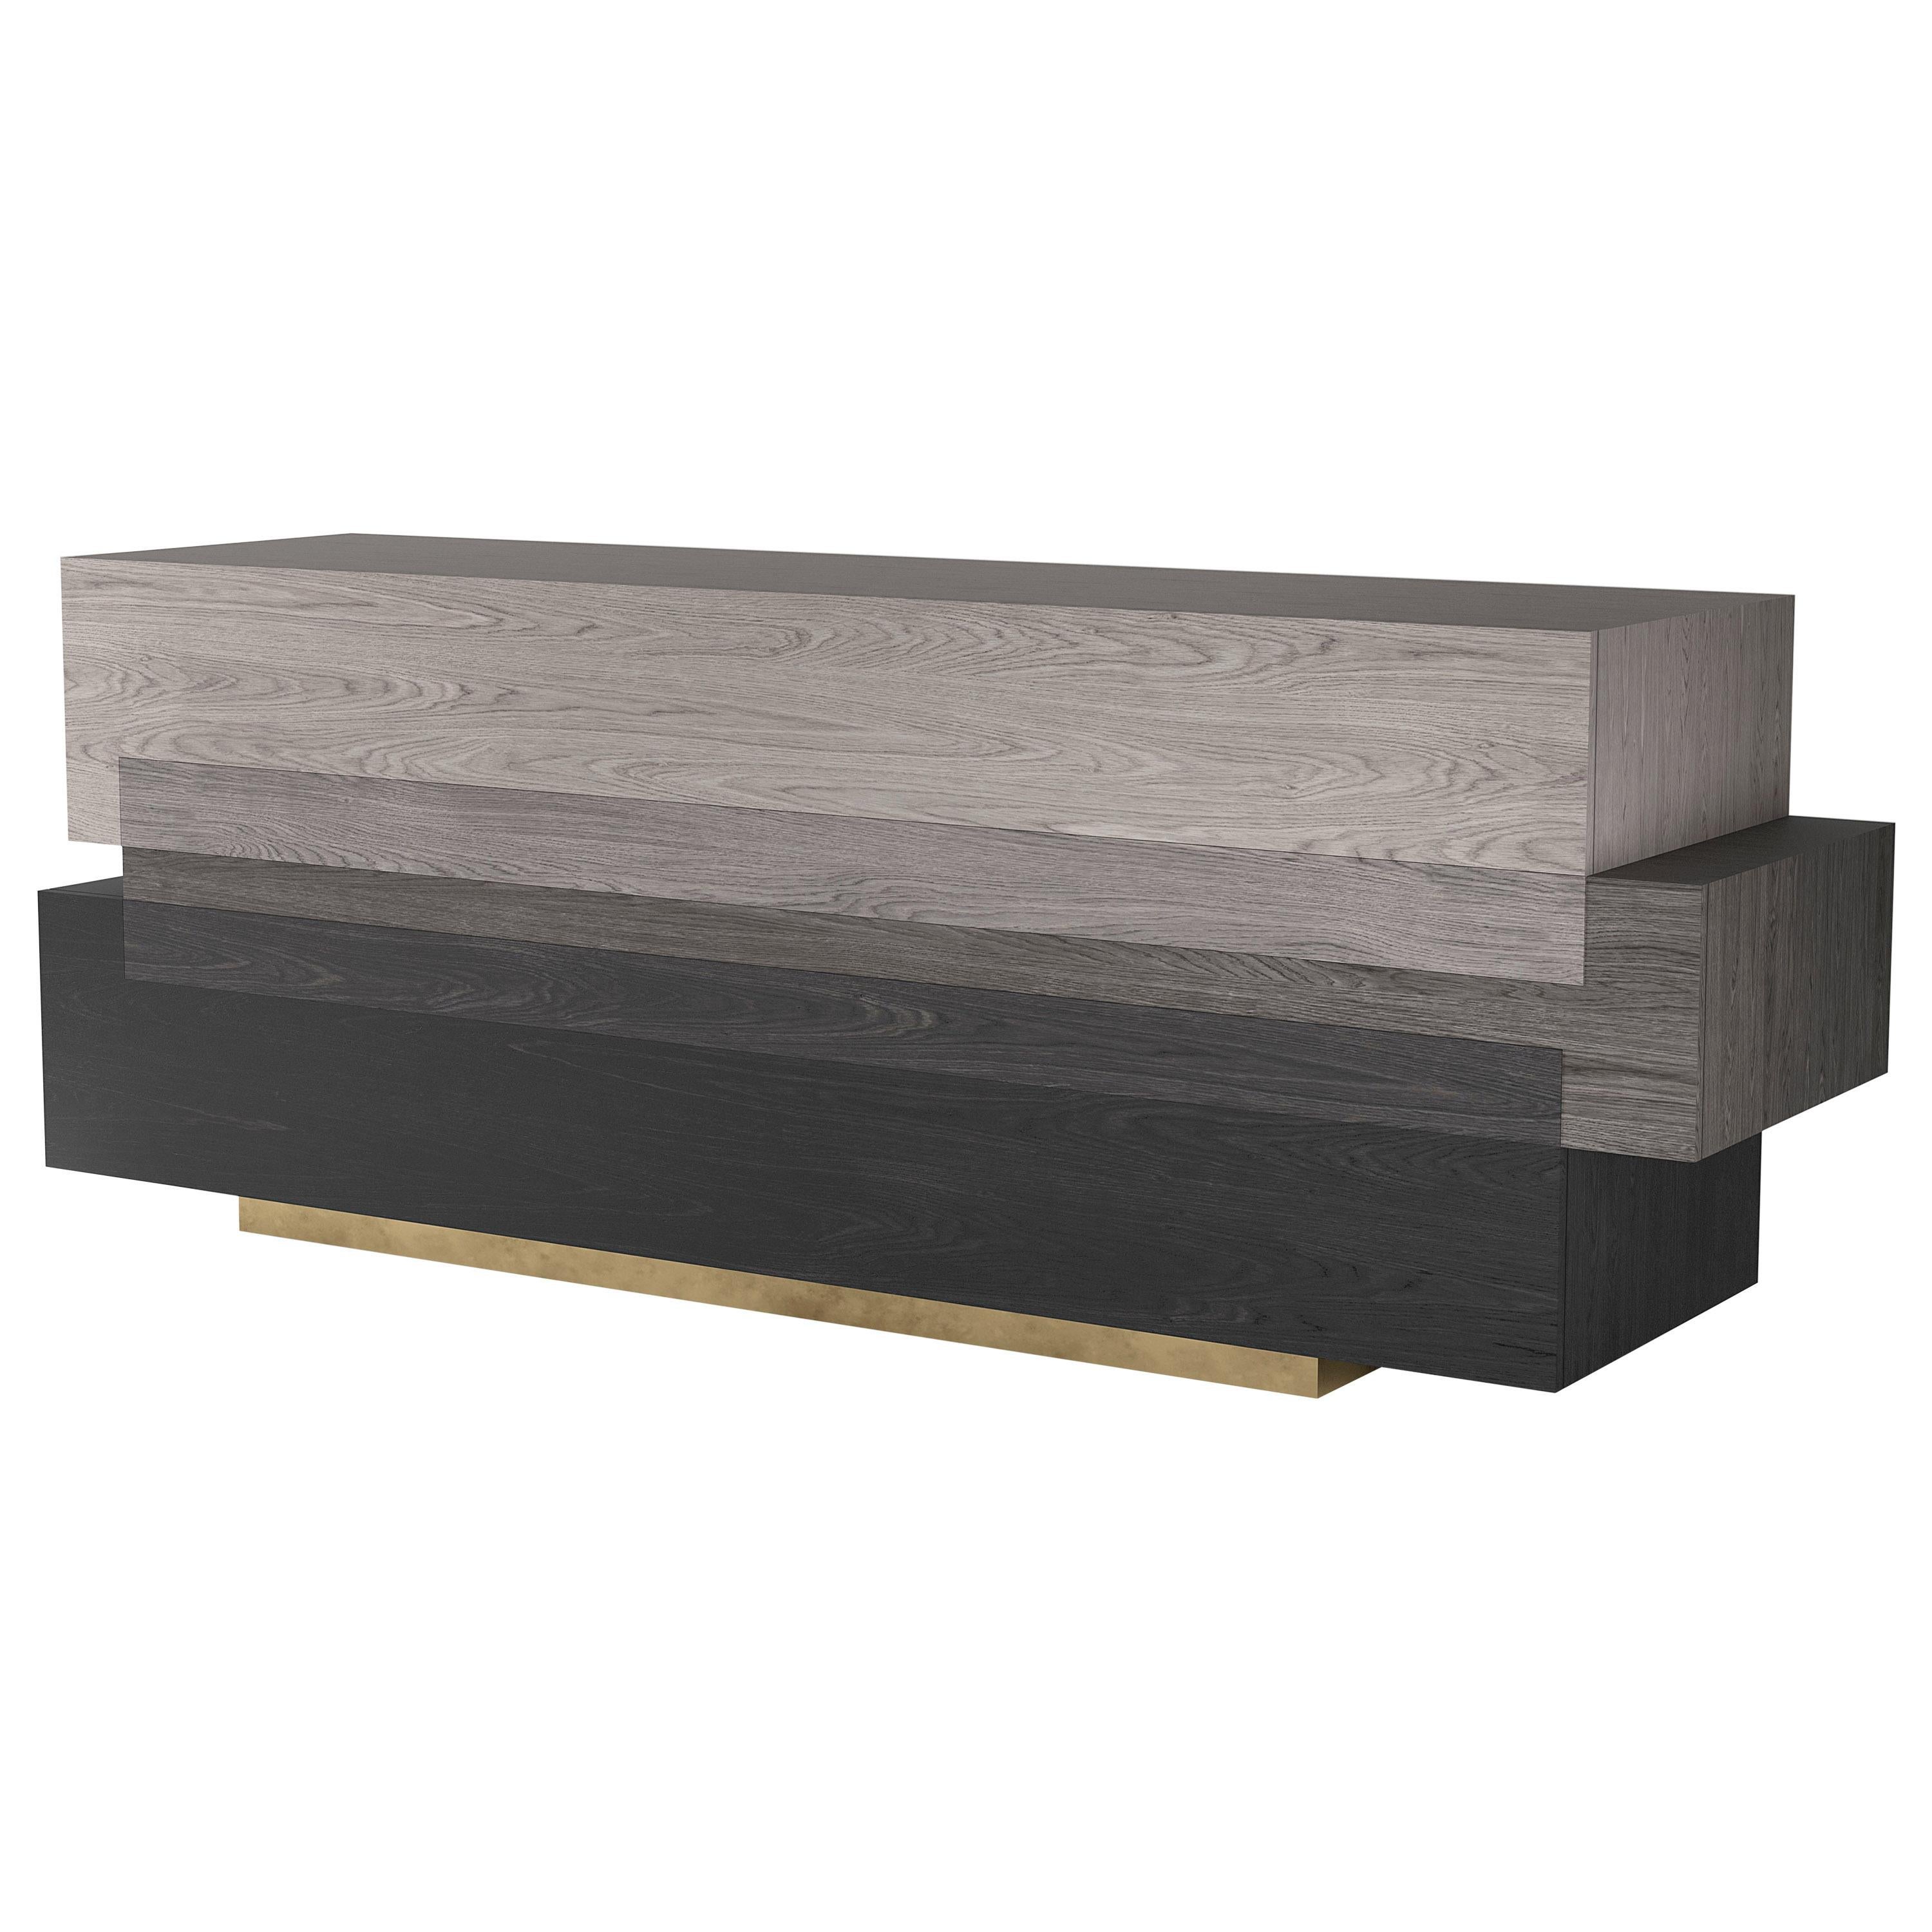 Booleanos Geometric Credenza with Gray Finishing and Brass Baseboard